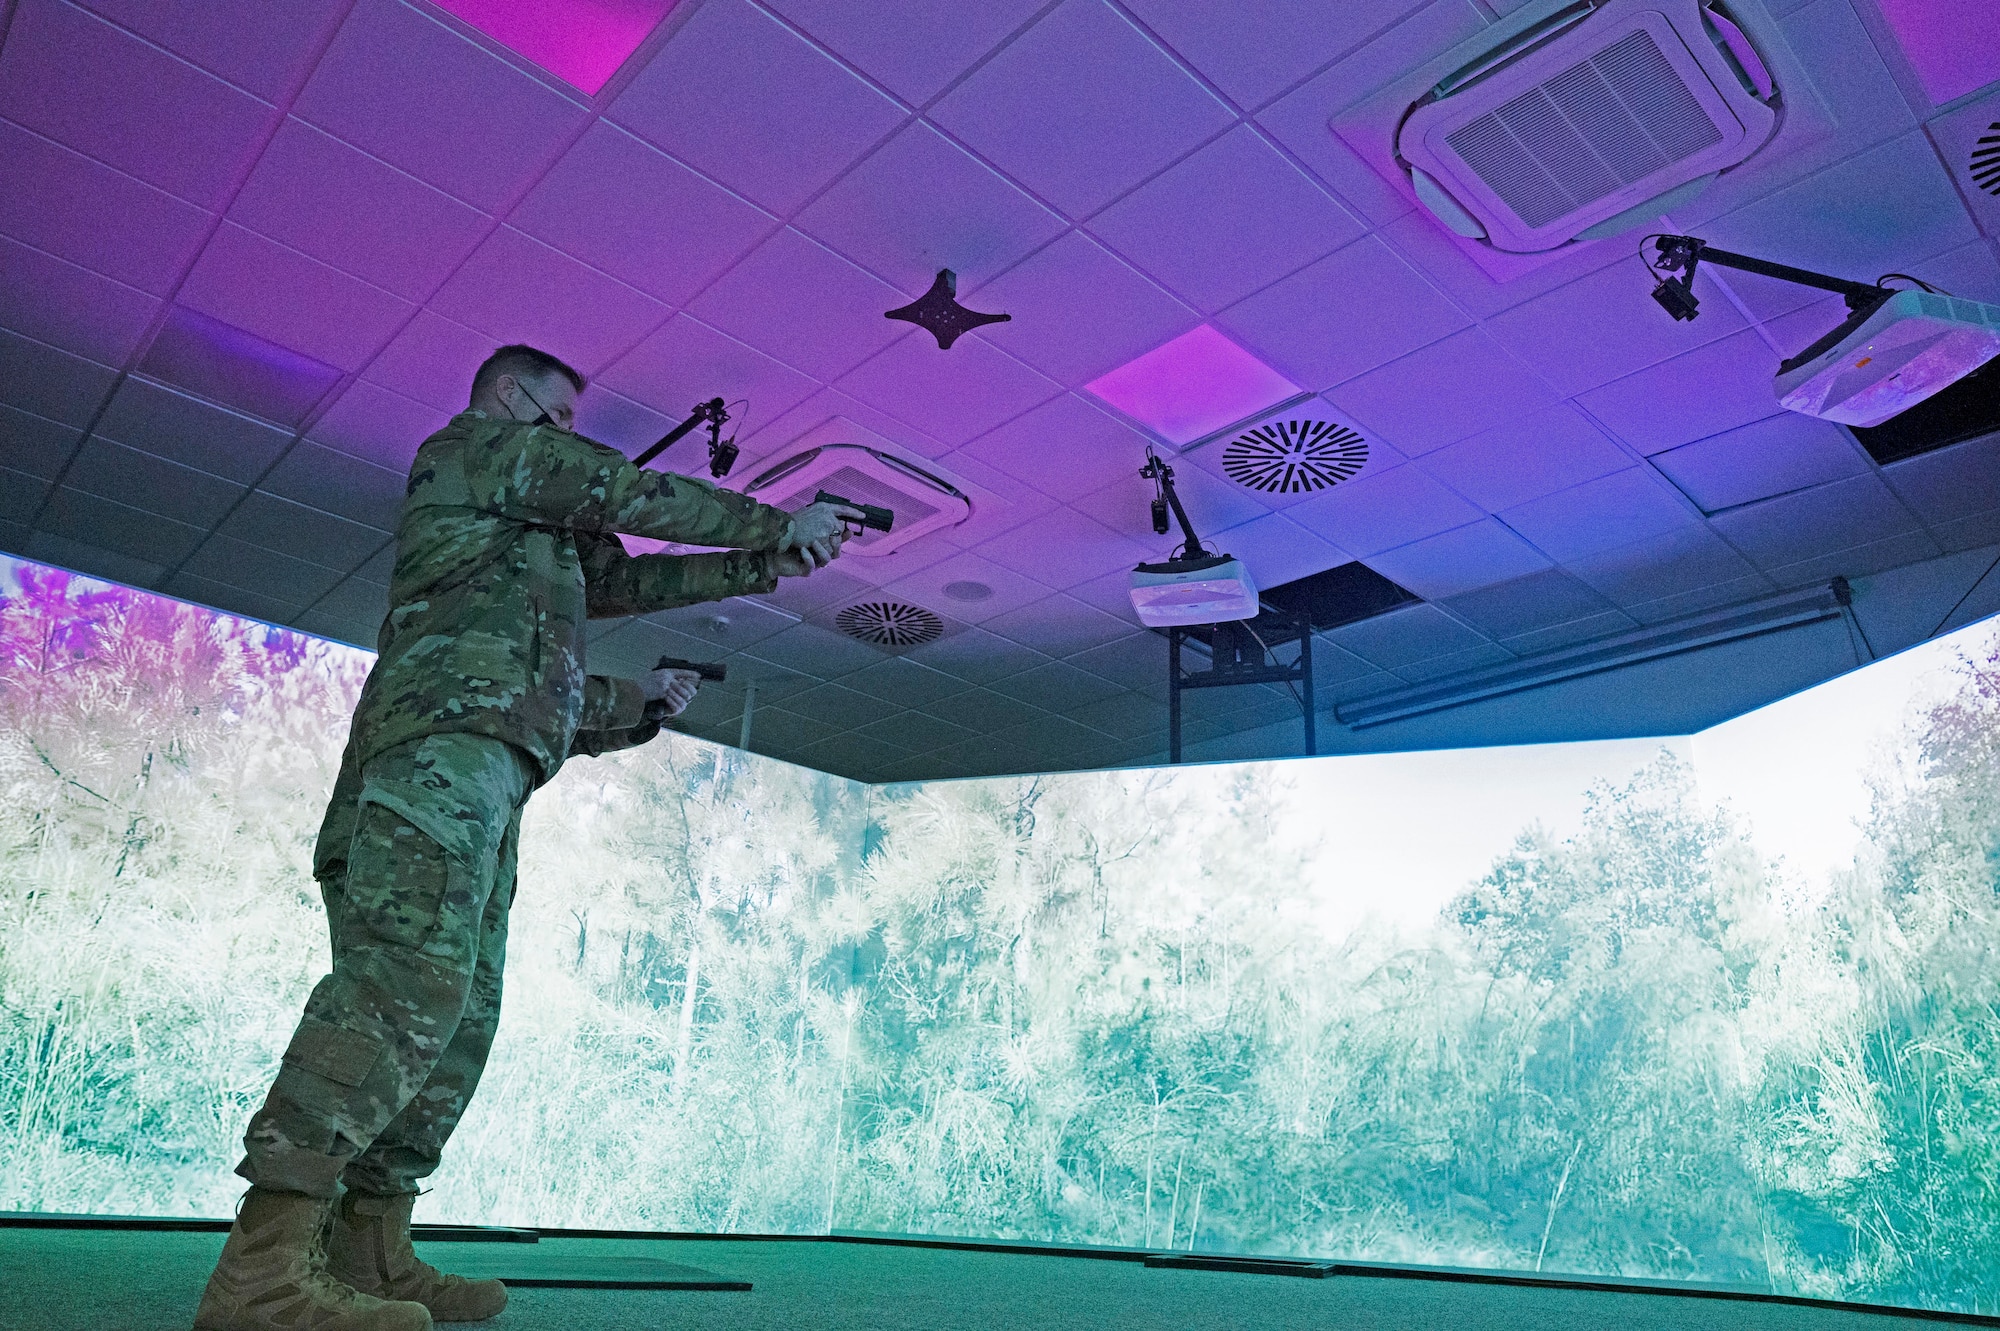 U.S. Air Force Col. Hall Sebren Jr., 72nd Air Base Wing Commander, Tinker Air Force Base, Oklahoma, participates in a training simulator at Ramstein Air Base, Germany, Jan. 12, 2022. Sebren is an inspector on the Commander-in-Chief’s Installation Excellence Award inspection team and inspected the 86th Security Forces Squadron’s innovations and solutions to help train and equip their Airmen with state-of-the-art technologies and equipment to defend the base. (U.S. Air Force photo by Senior Airman Thomas Karol)